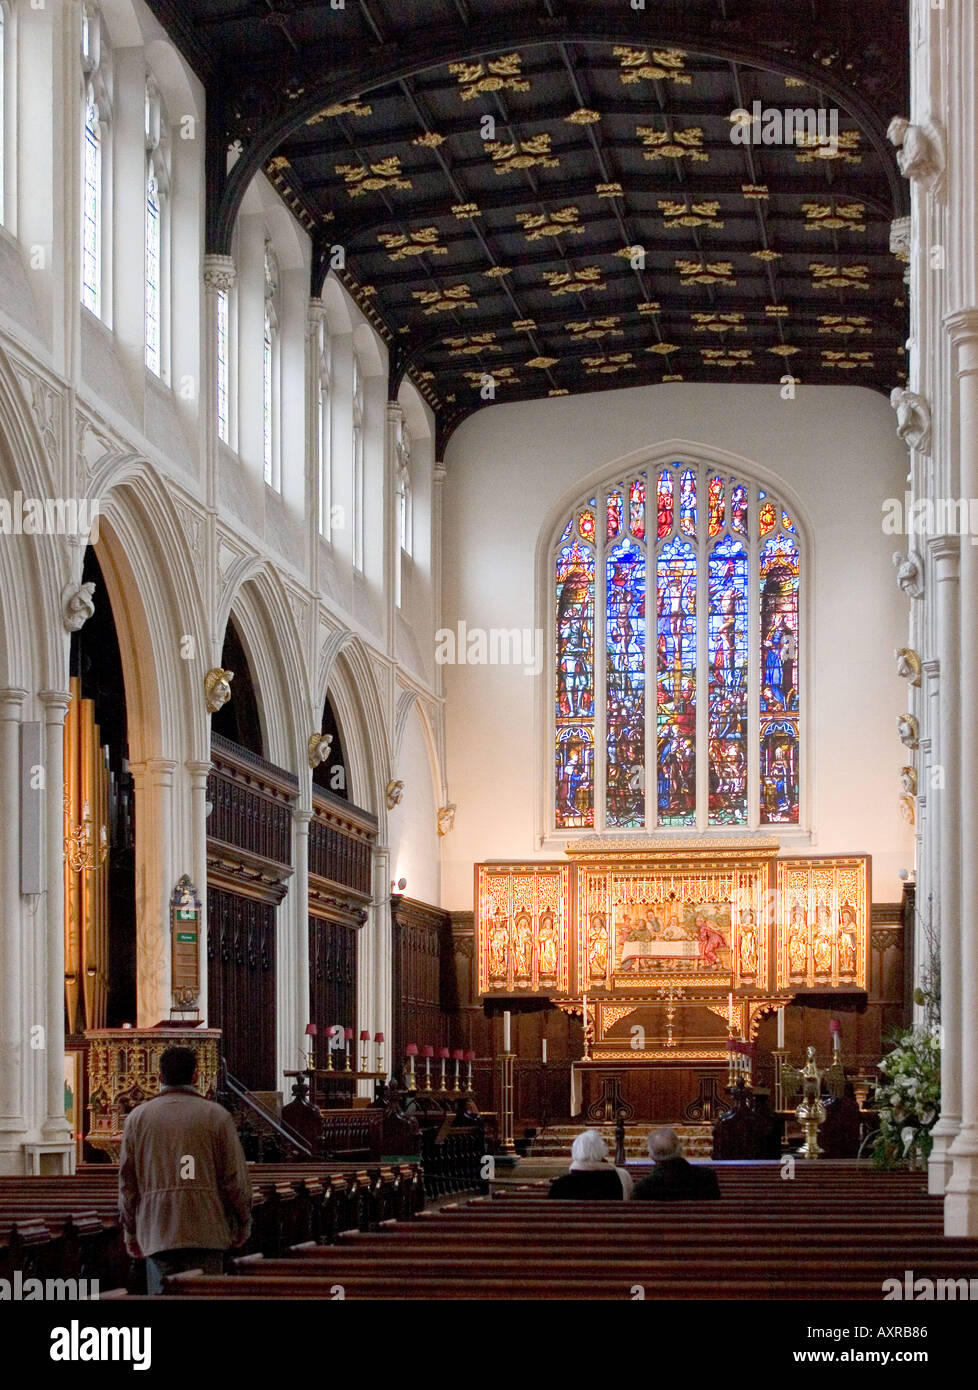 St Margarets Chiesa Piazza del Parlamento Westminster London GB UK Foto Stock